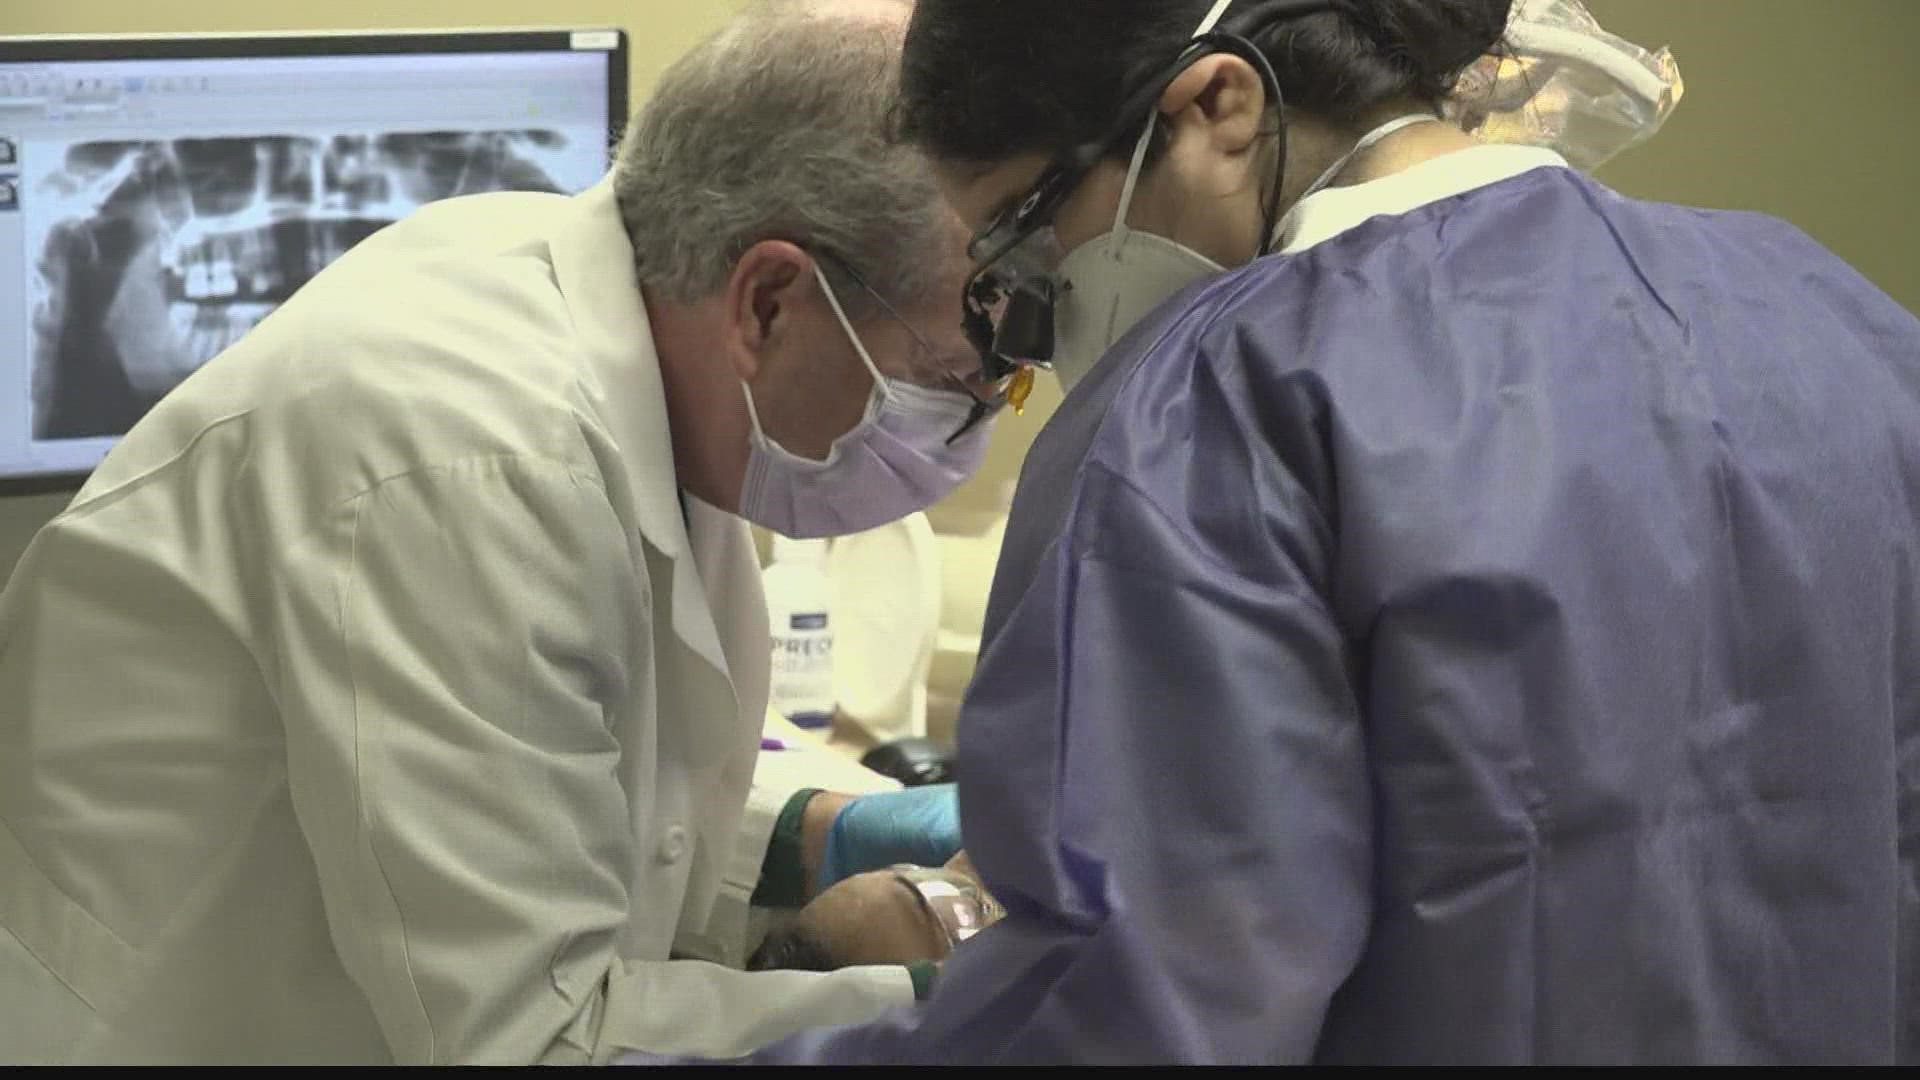 Community Free Dental Clinic has performed $3.4 million worth of services to benefit its community since 2015.